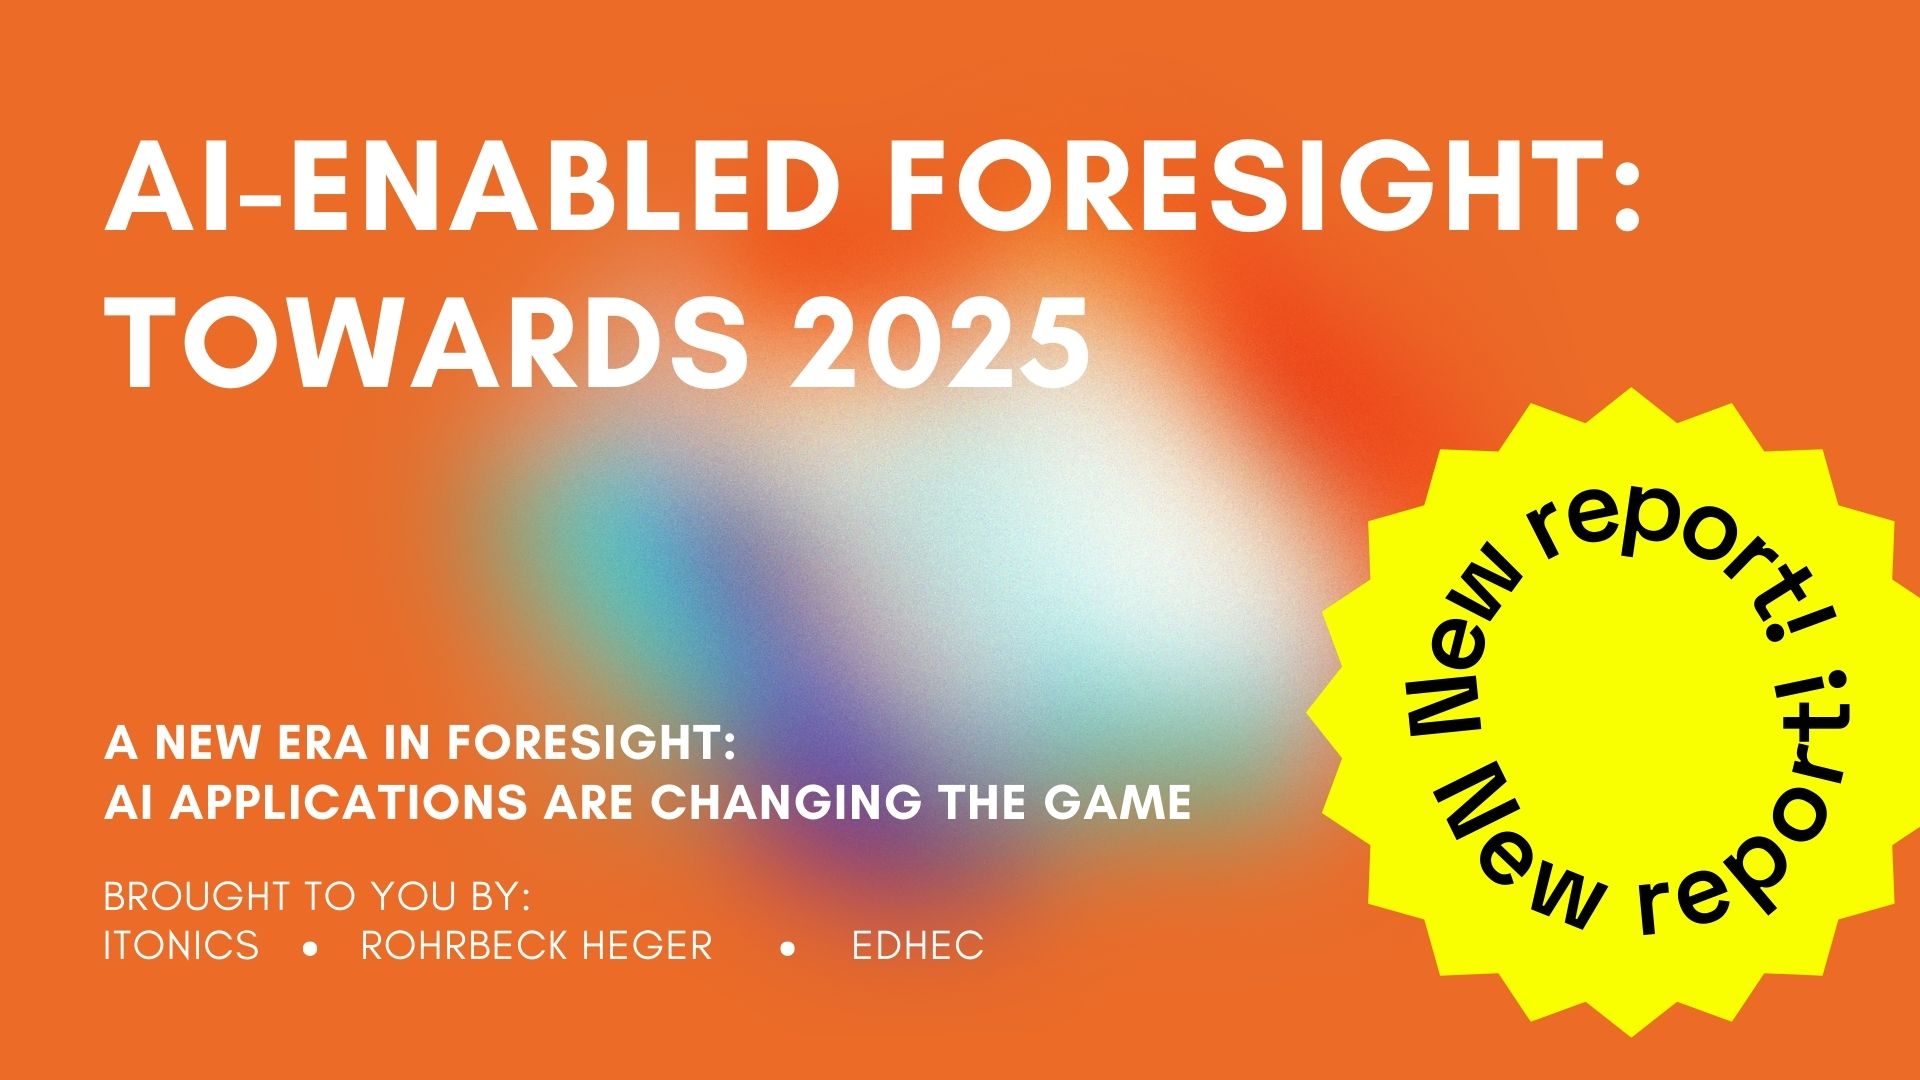 REPORT: AI-Enabled Foresight Towards 2025